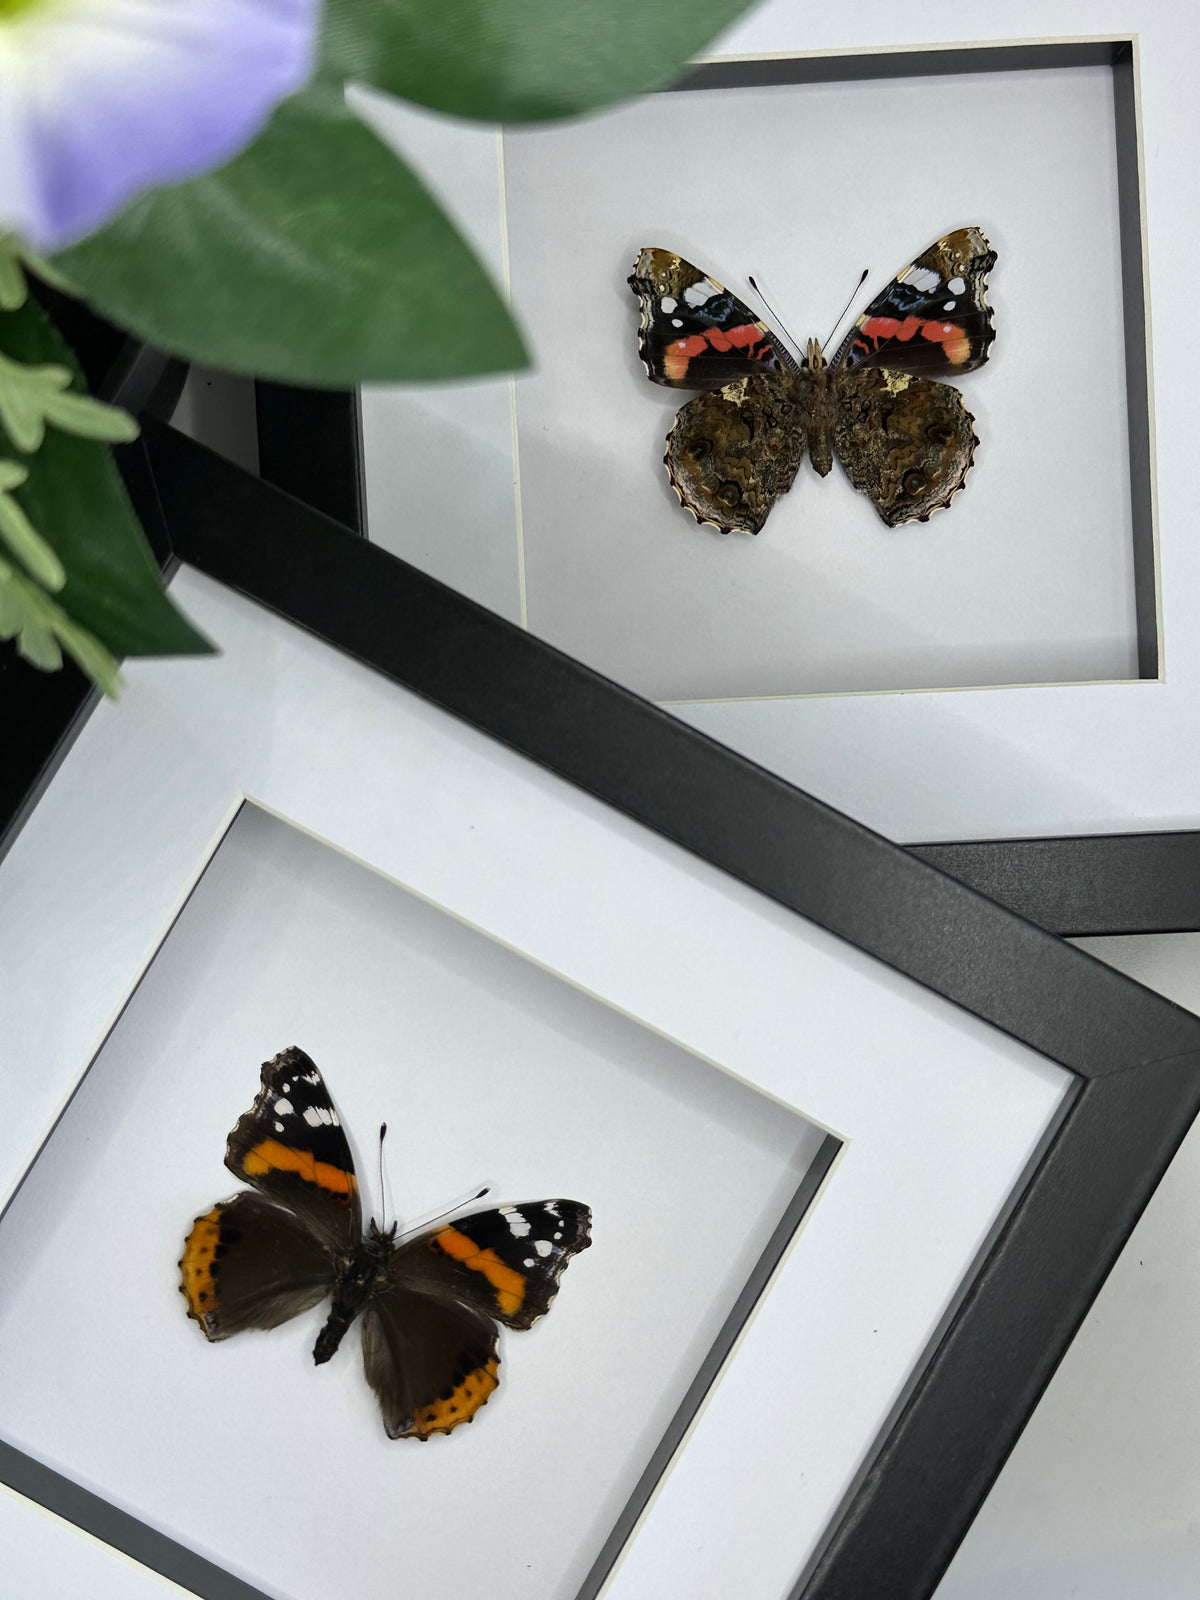 Red Admiral Butterfly / Vanessa Atalanta in a frame